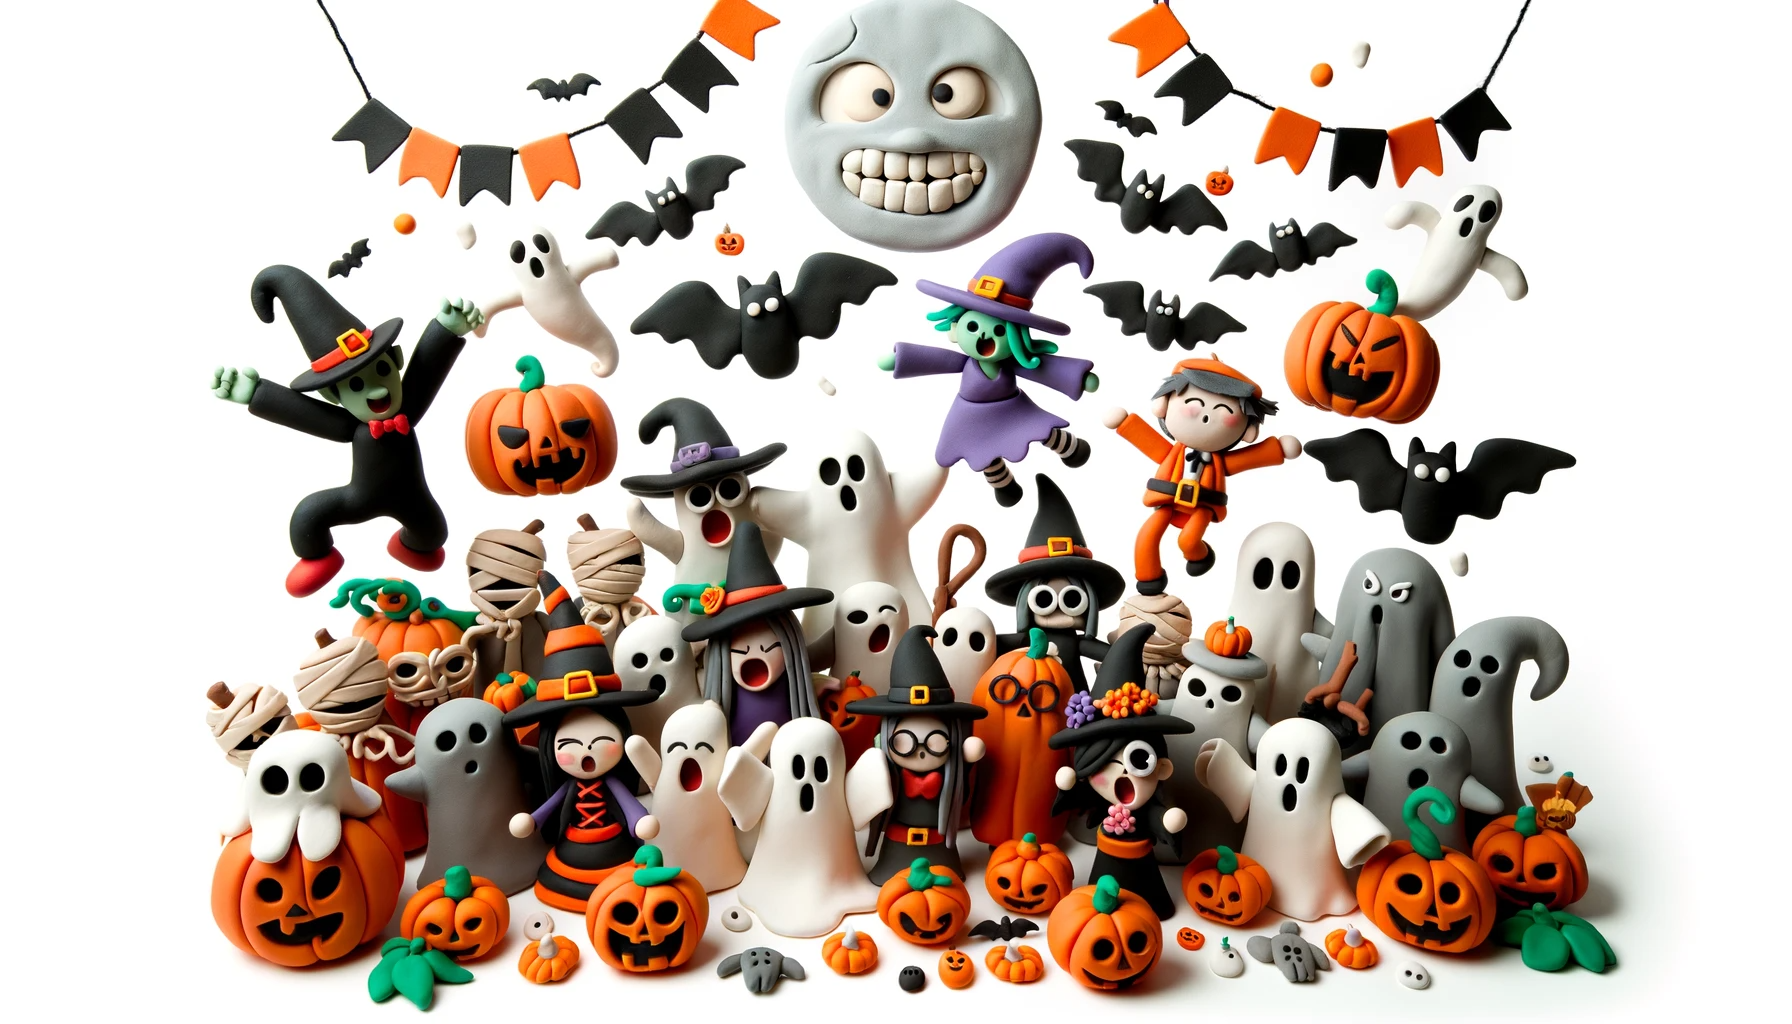 Showcasing a festive Halloween scene with clay animated characters in various costumes